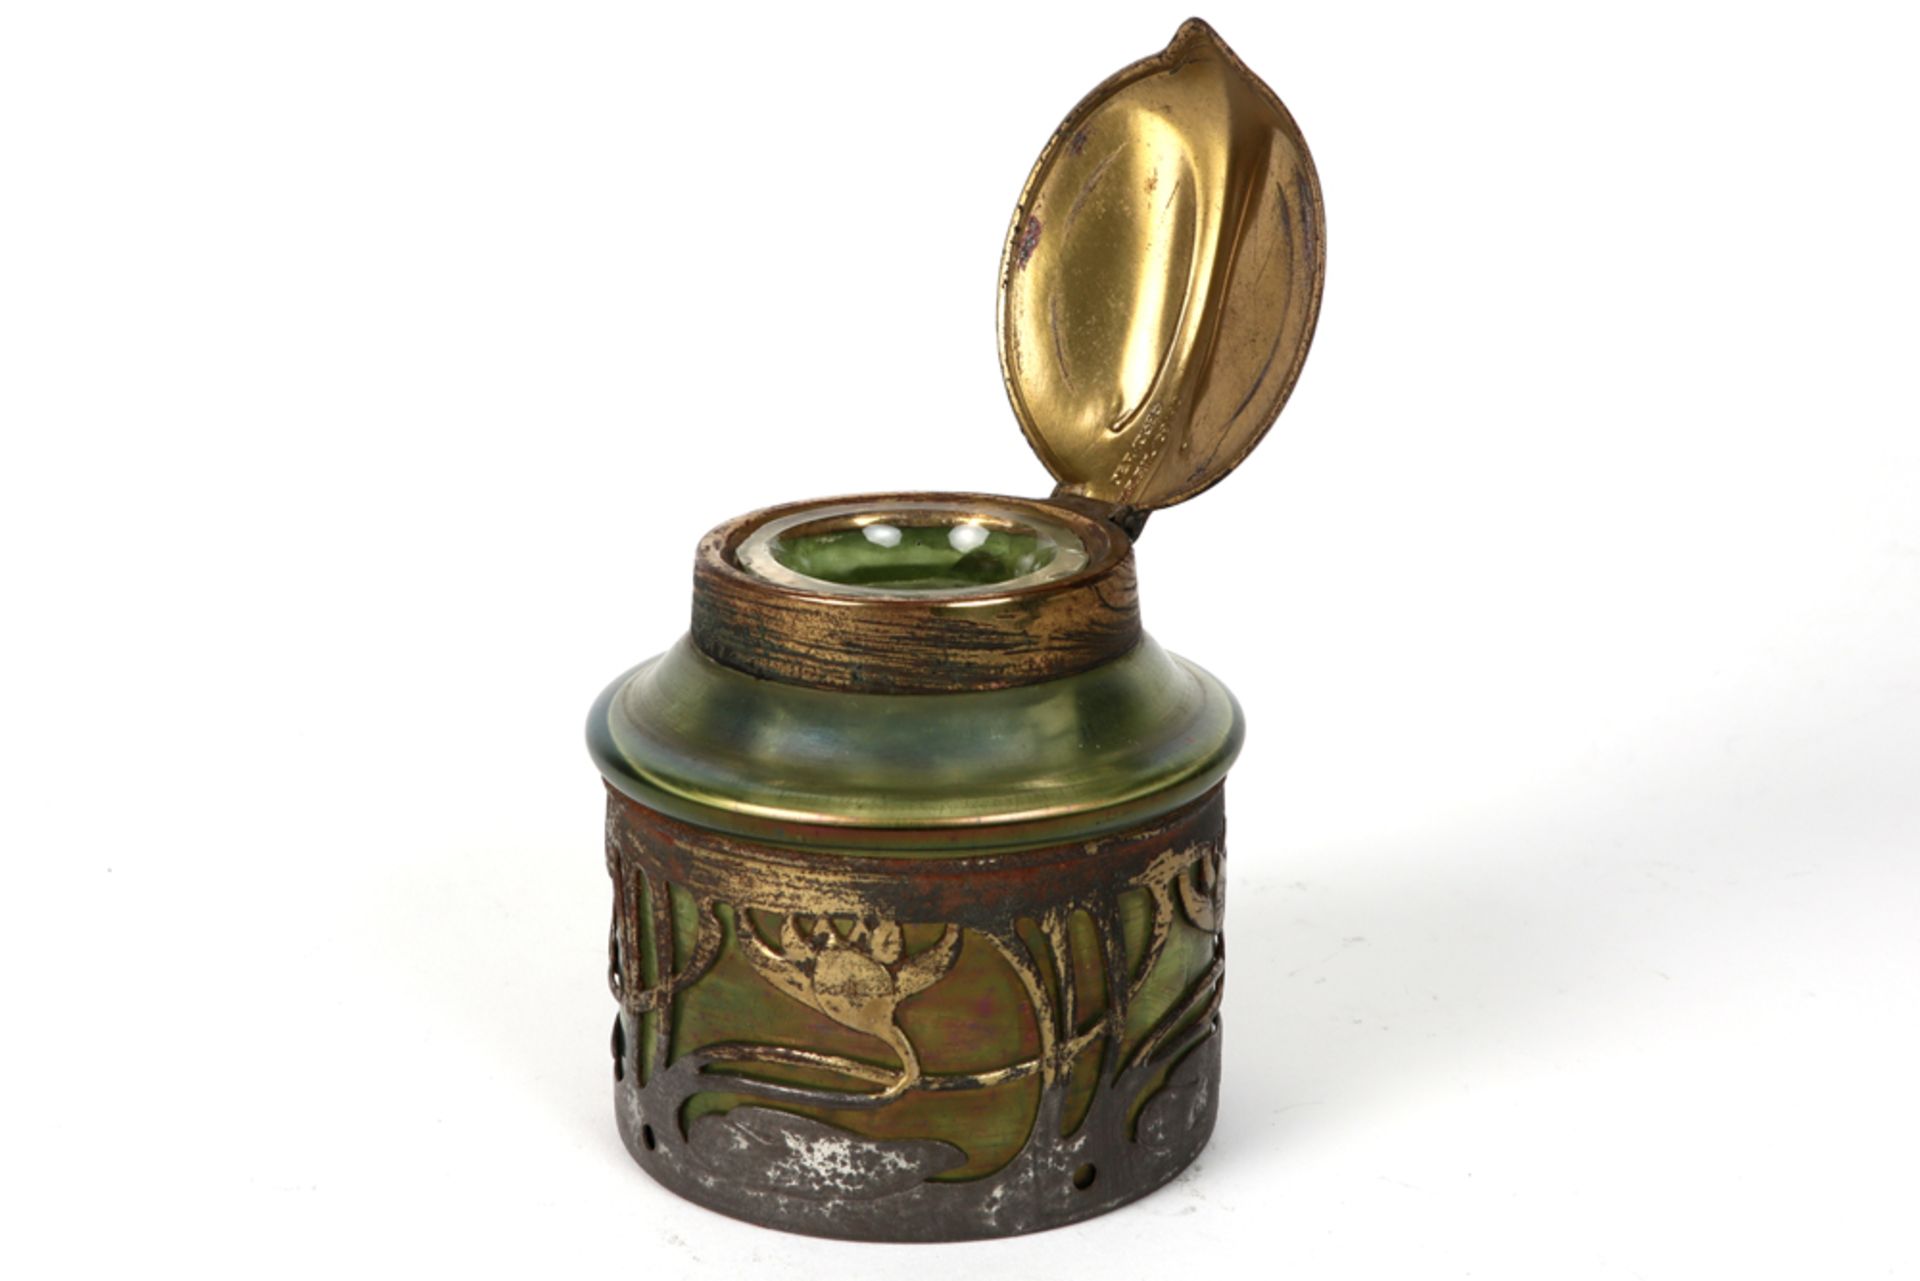 German marked Art Nouveau inkwell in glass (maybe by Loetz) with a silverplated mounting - Image 2 of 3